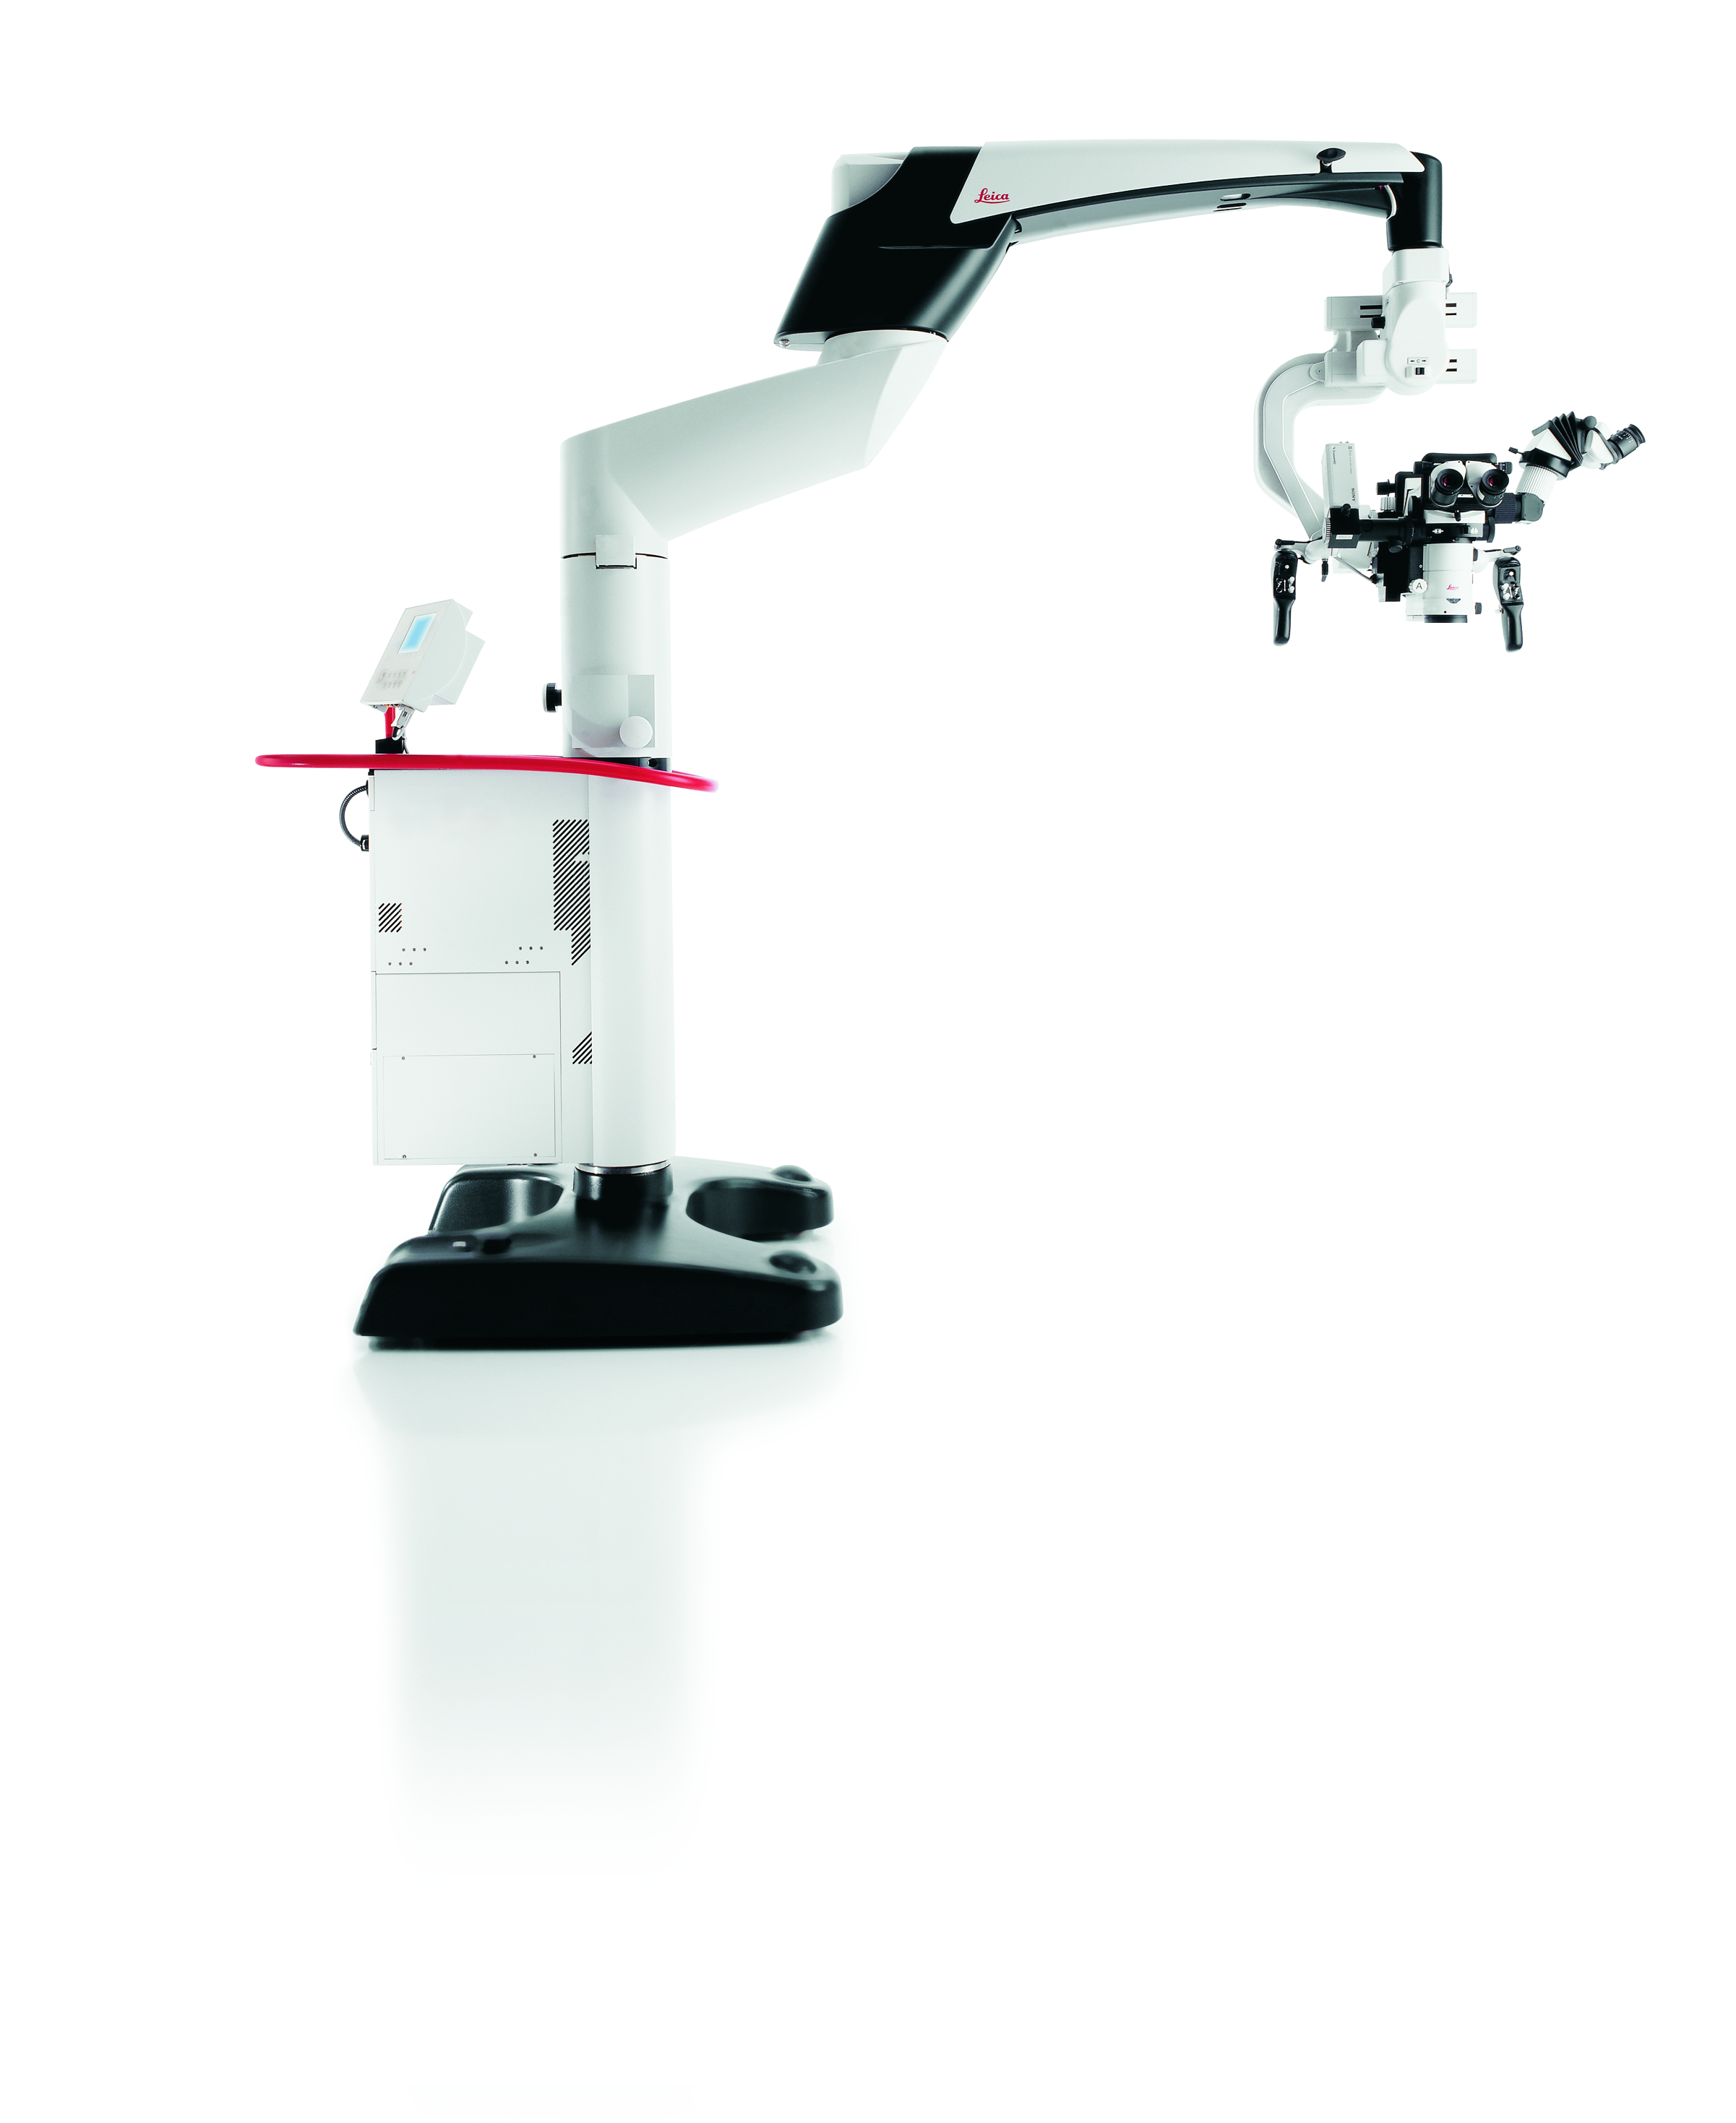 The Leica M525 MS3 surgical microscope solution for neurosurgery, spine surgery and ENT.